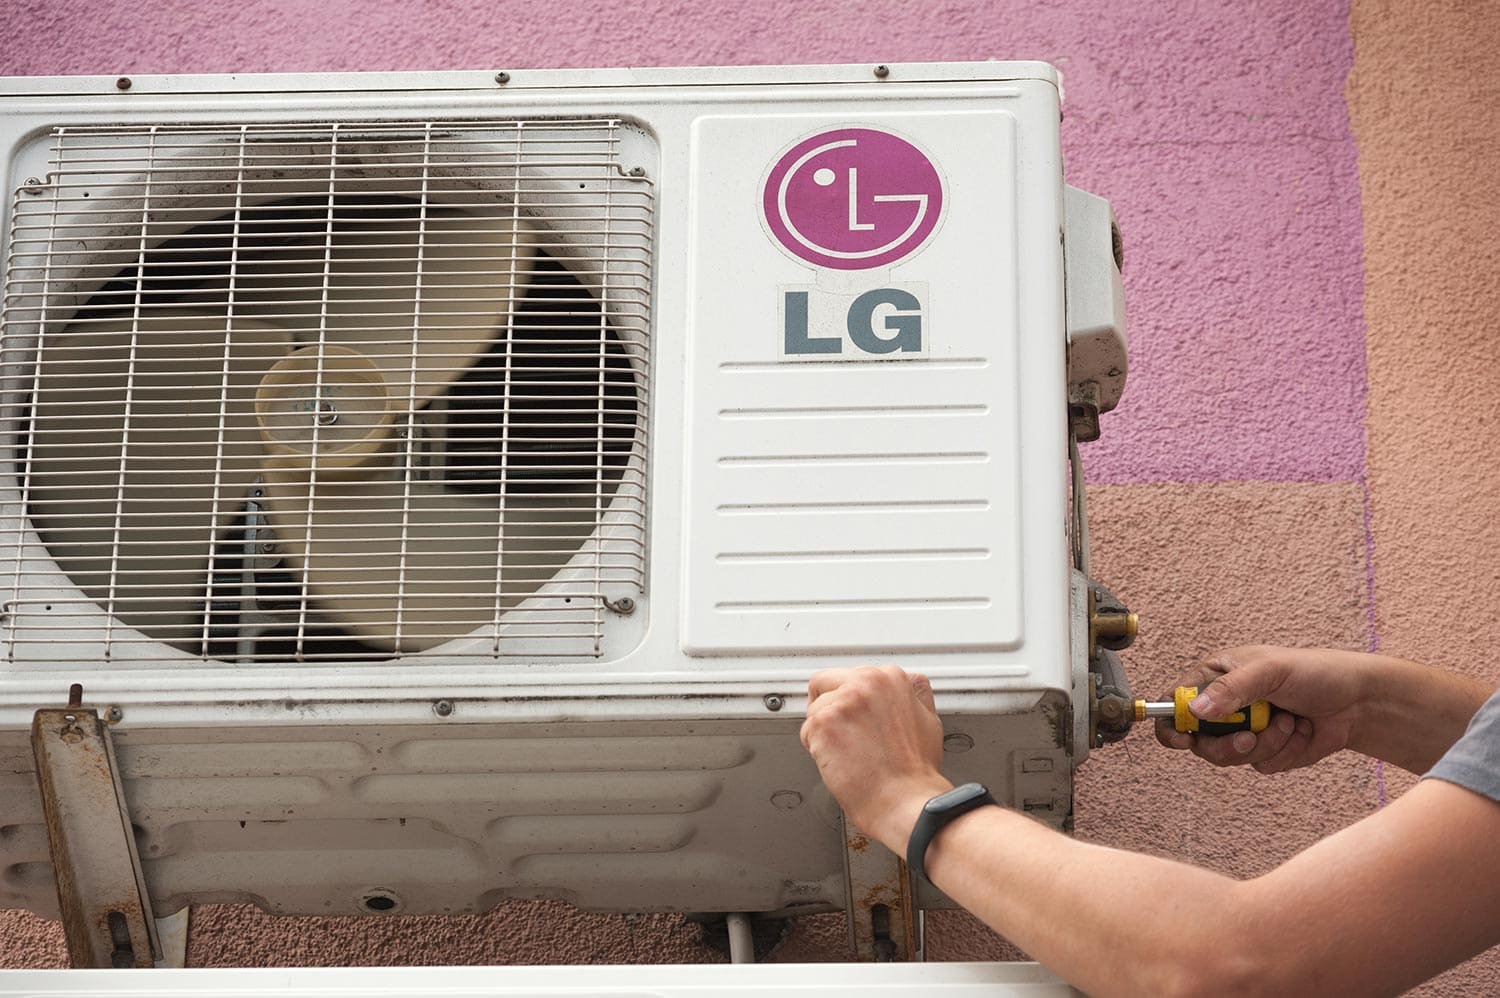 Ttechnician carries out service of the old LG air conditioner unit